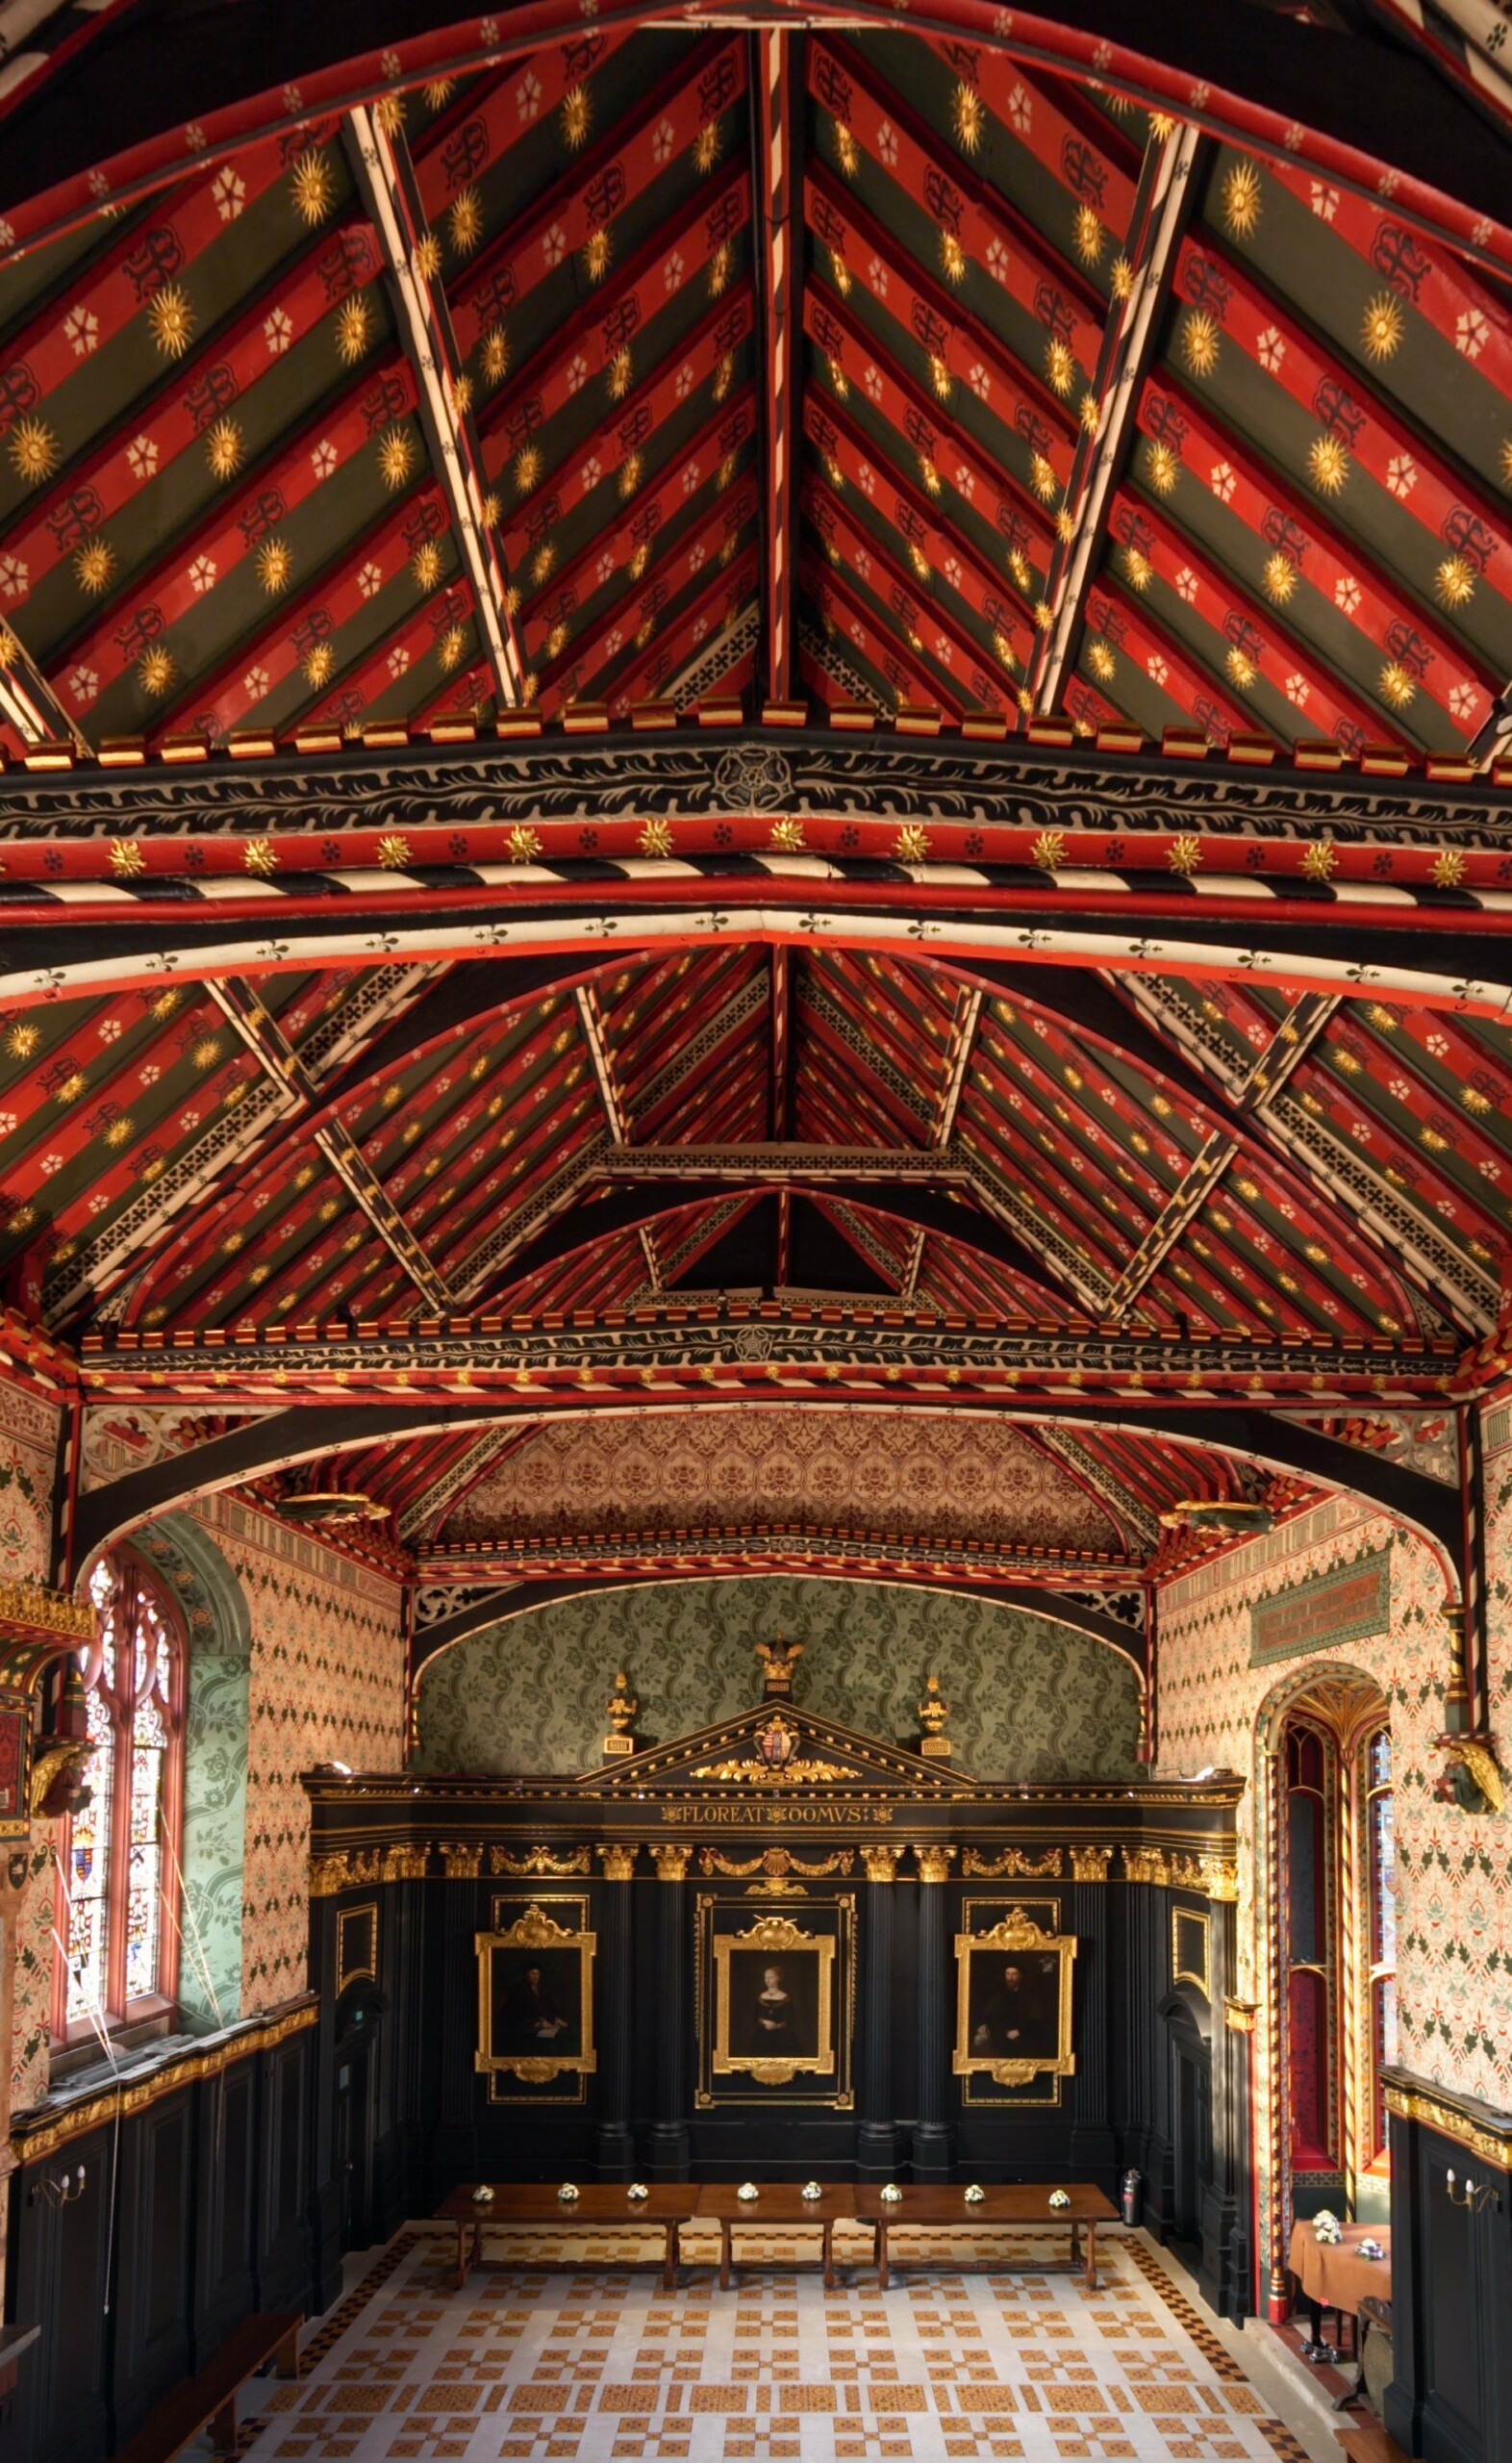 Donald Insall Associates led extensive works to refresh the 19th century decorative scheme and The Old Hall, Queens' College Cambridge